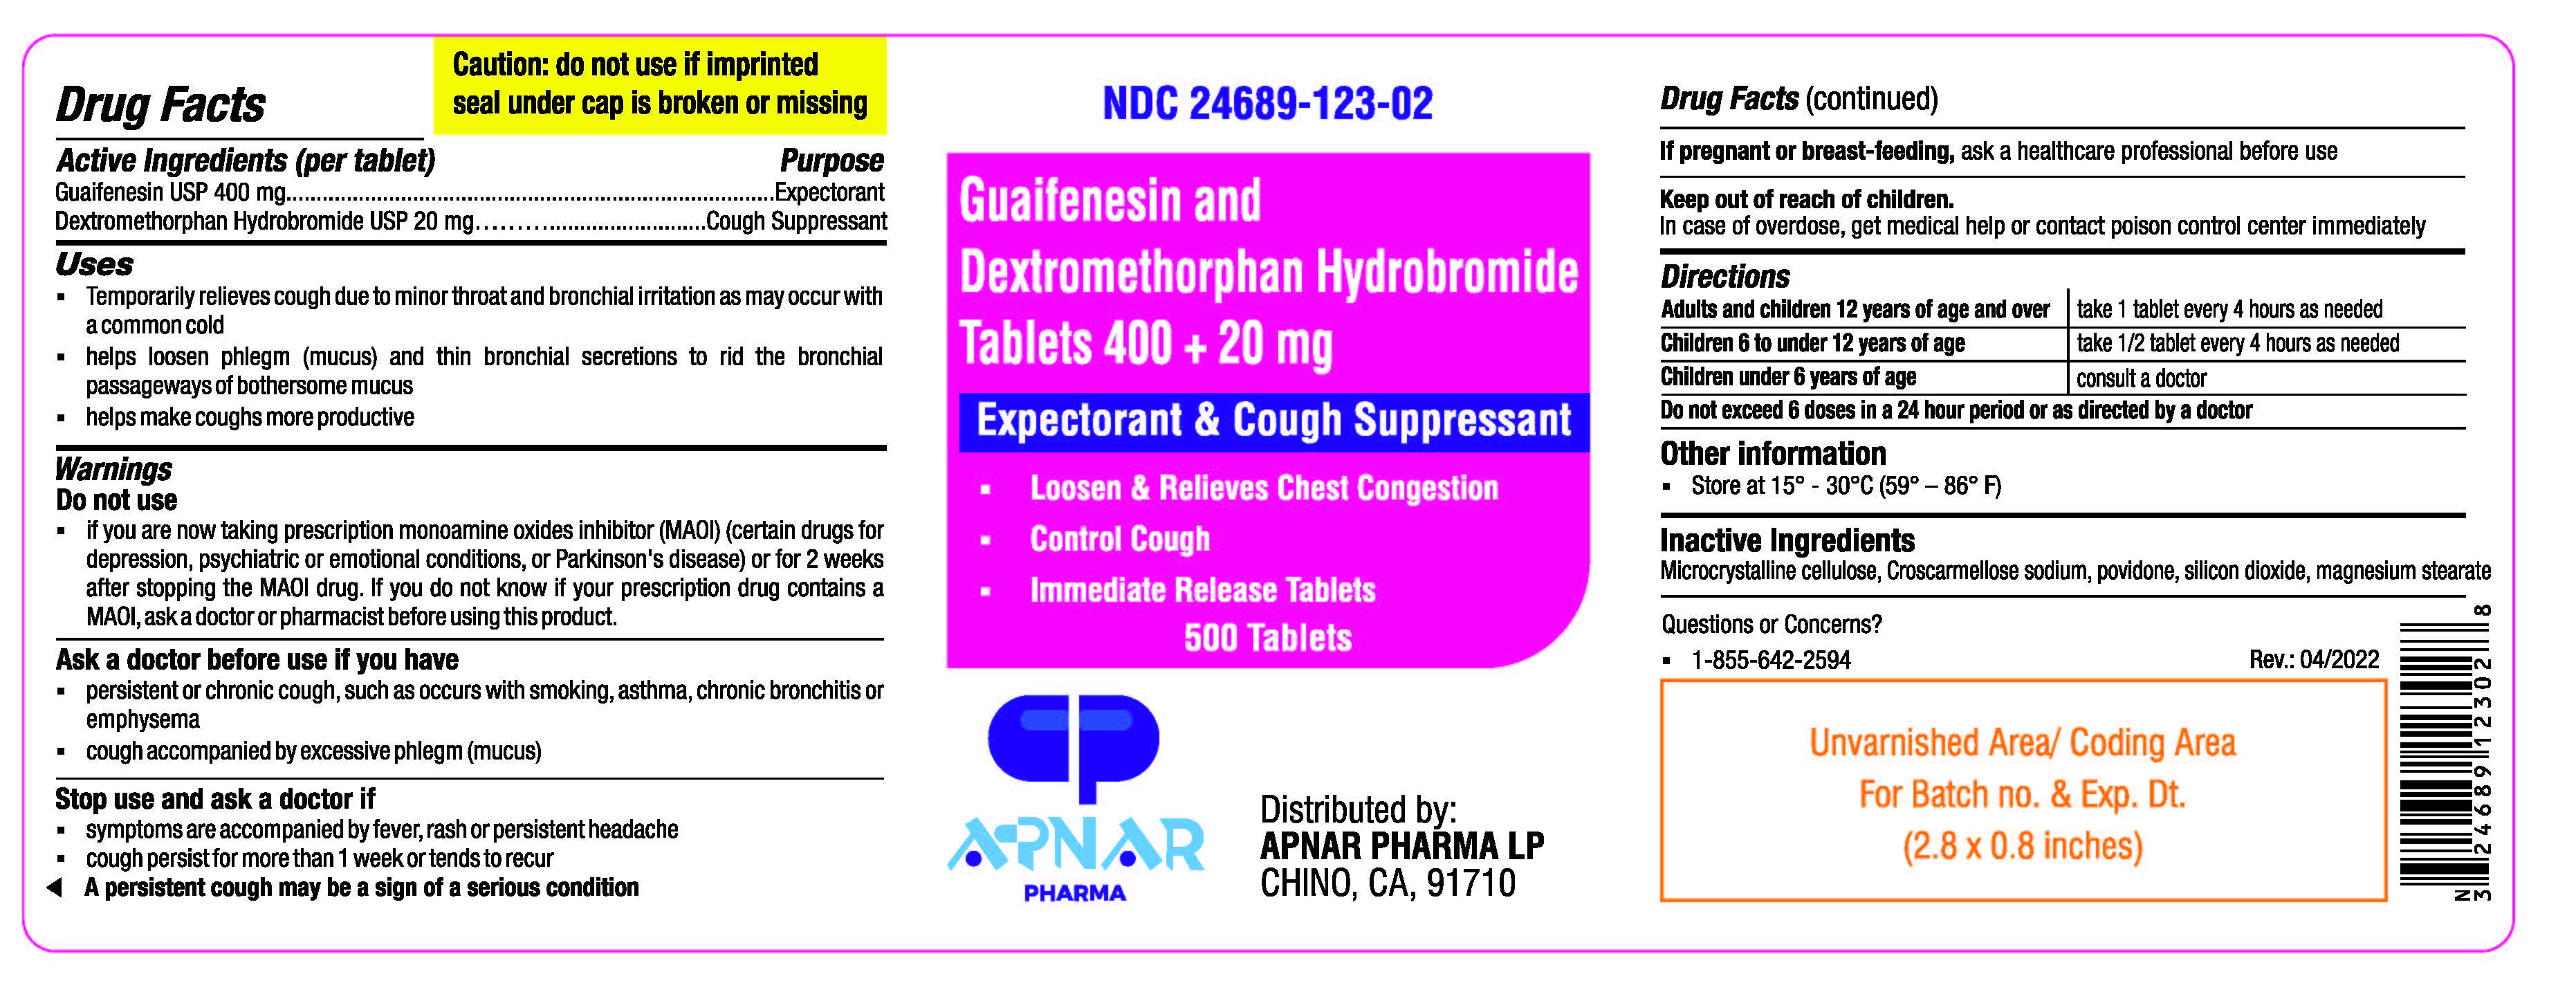 Guaifenesin and Hbr tablets 400+20mg- 500s tablets